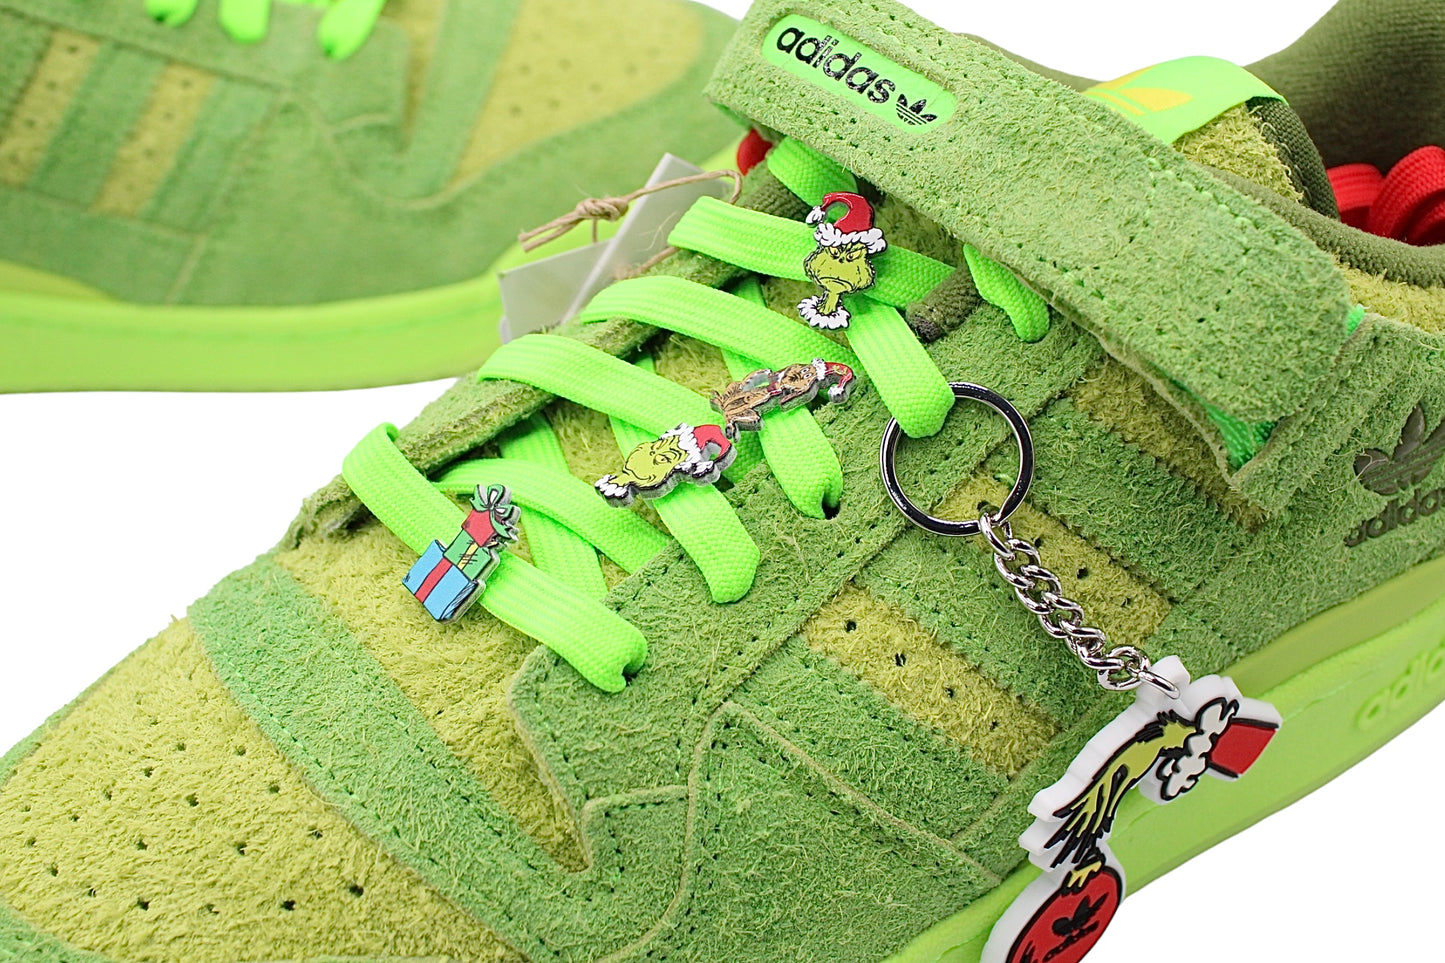 Adidas Forum Low ‘The Grinch’